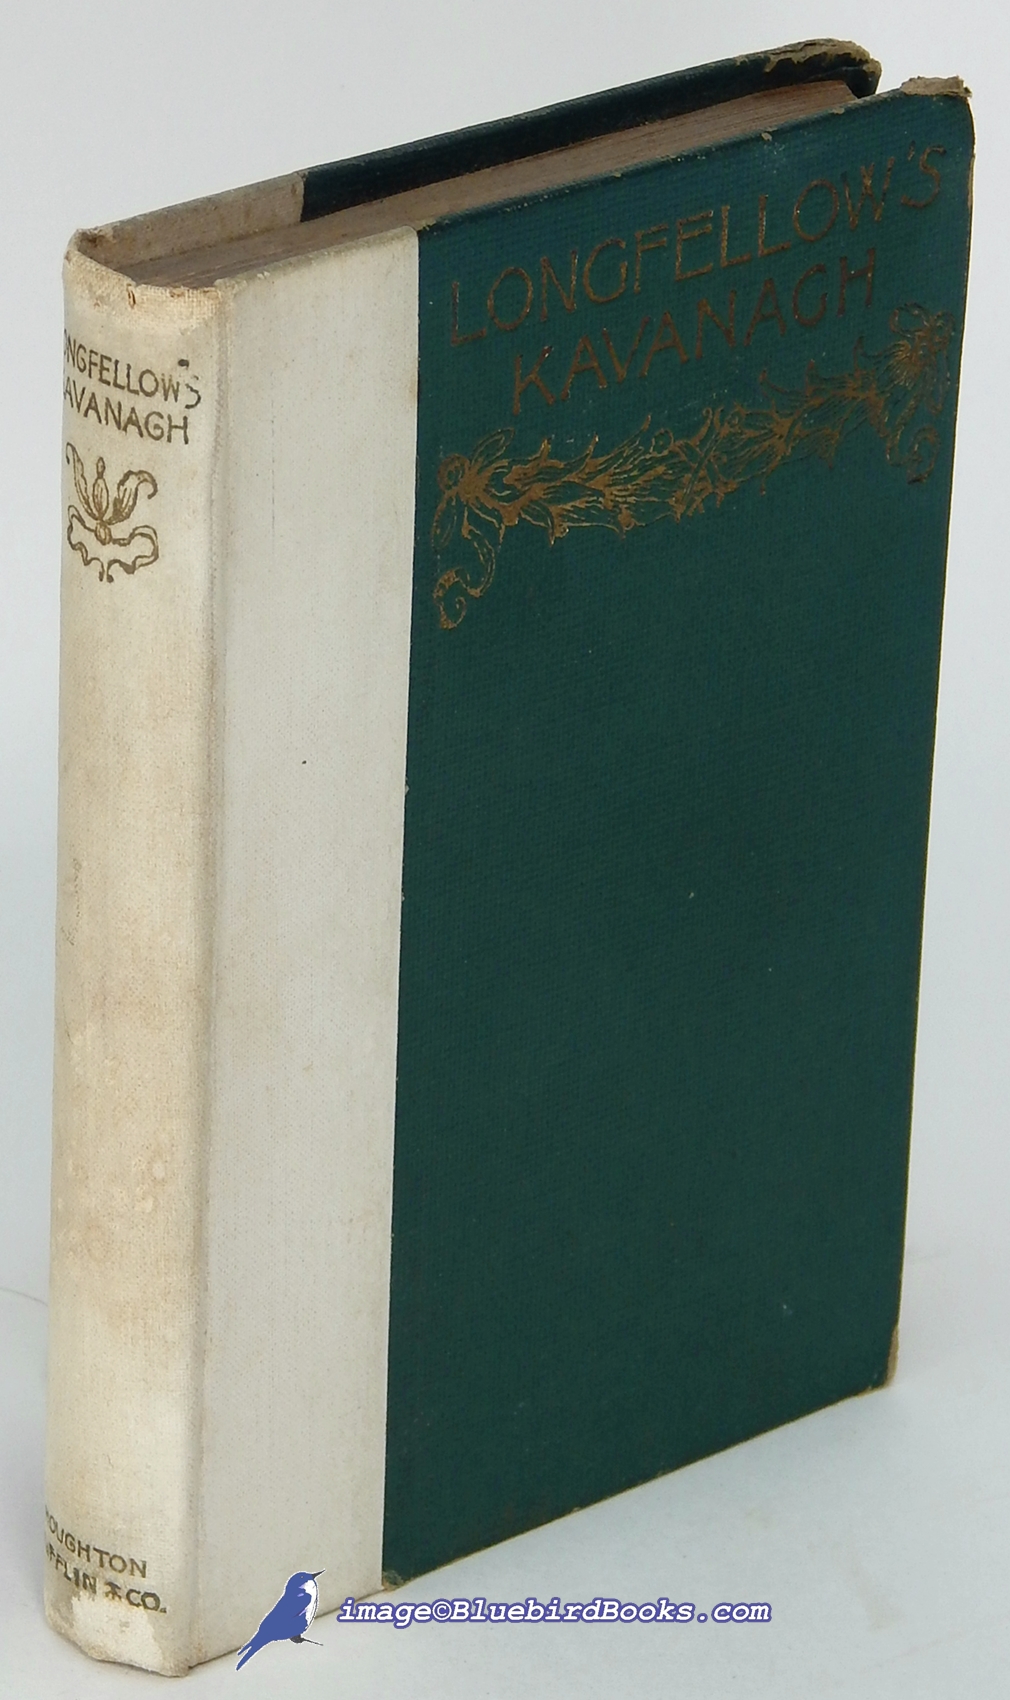 LONGFELLOW, HENRY WADSWORTH - Kavanagh: A Tale